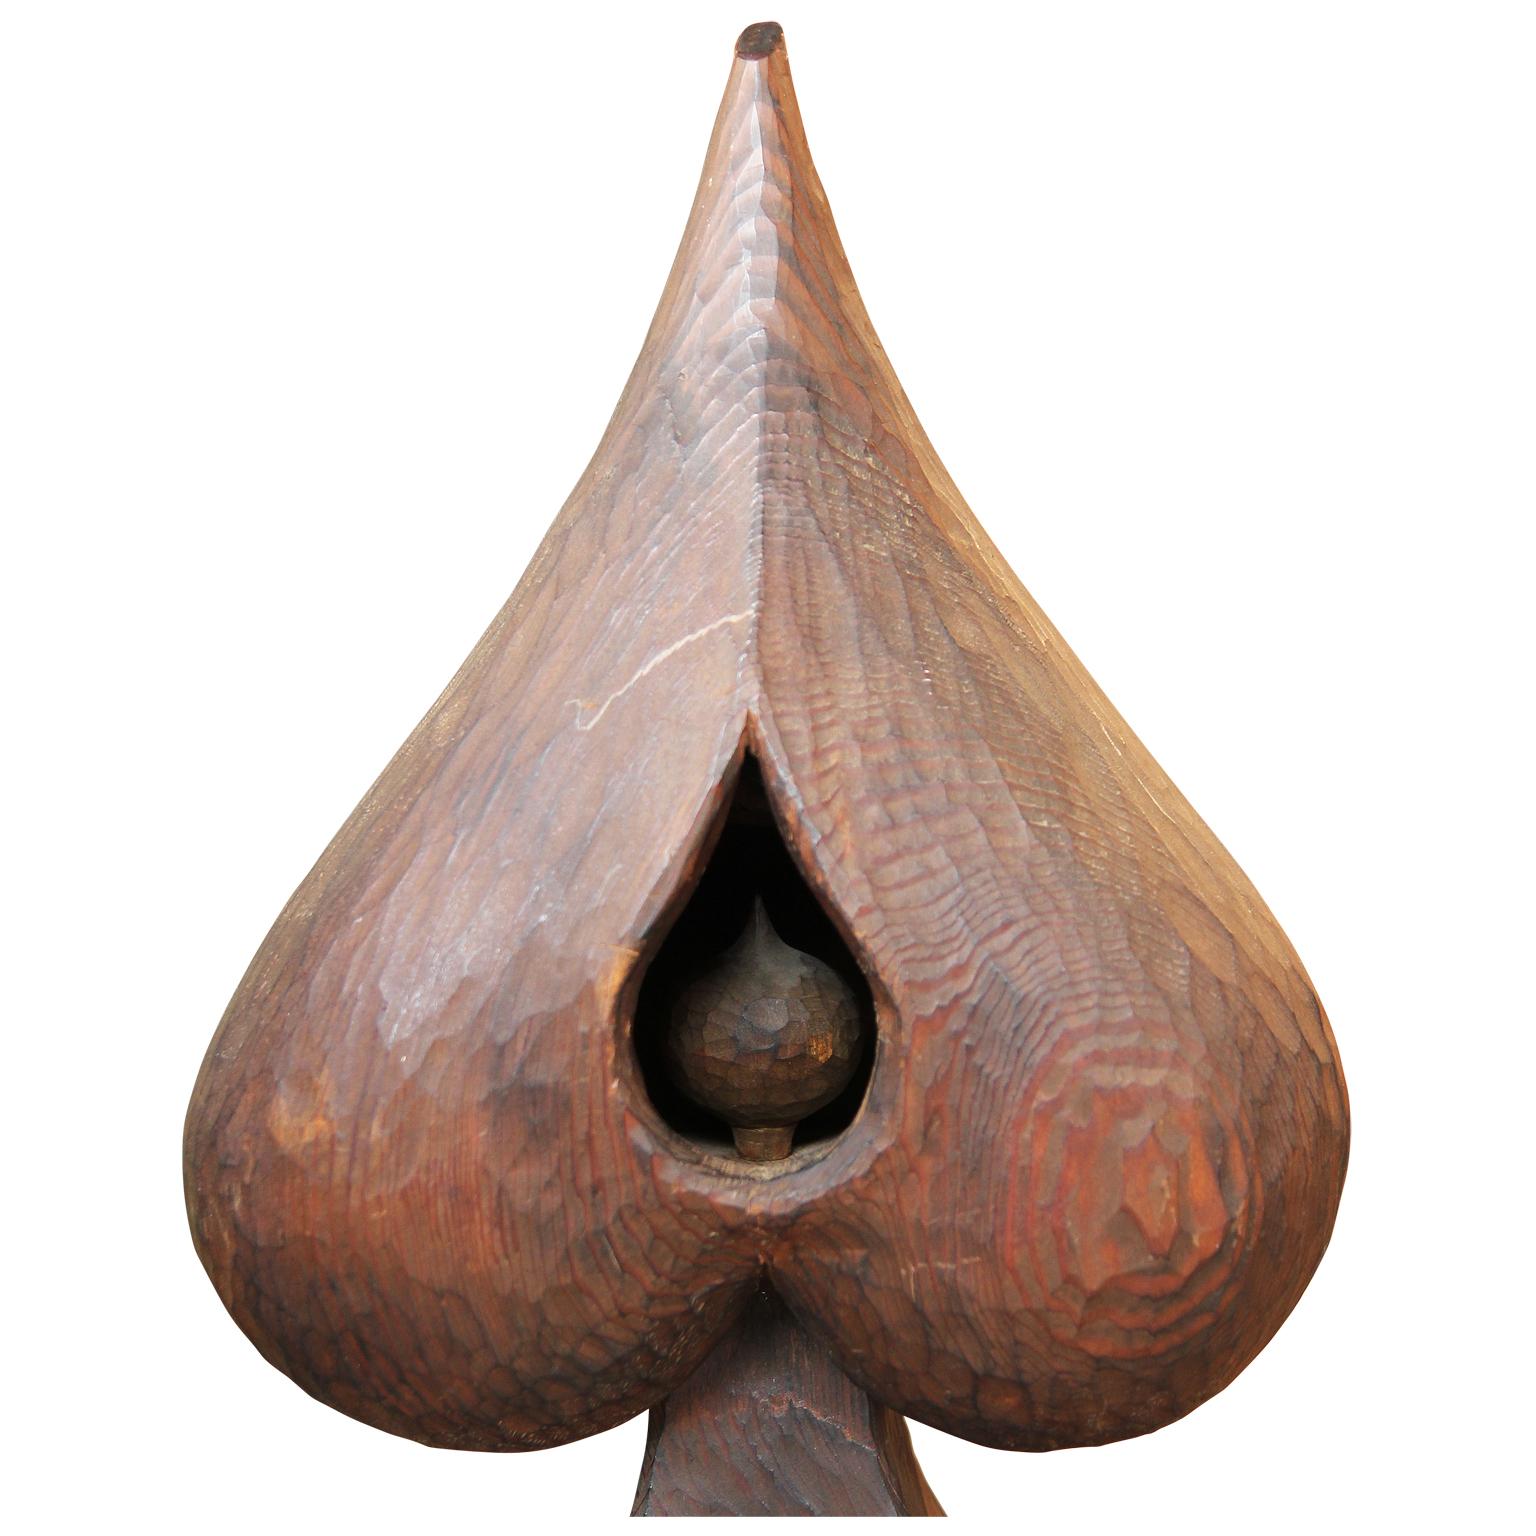 Modern surrealist abstract wooden sculpture by Texas artist Roy Fridge. The work features a prominent spade shape with two open recesses. The top opening exposes a teardrop shape and the bottom shows more machine-like forms. Currently mounted onto a